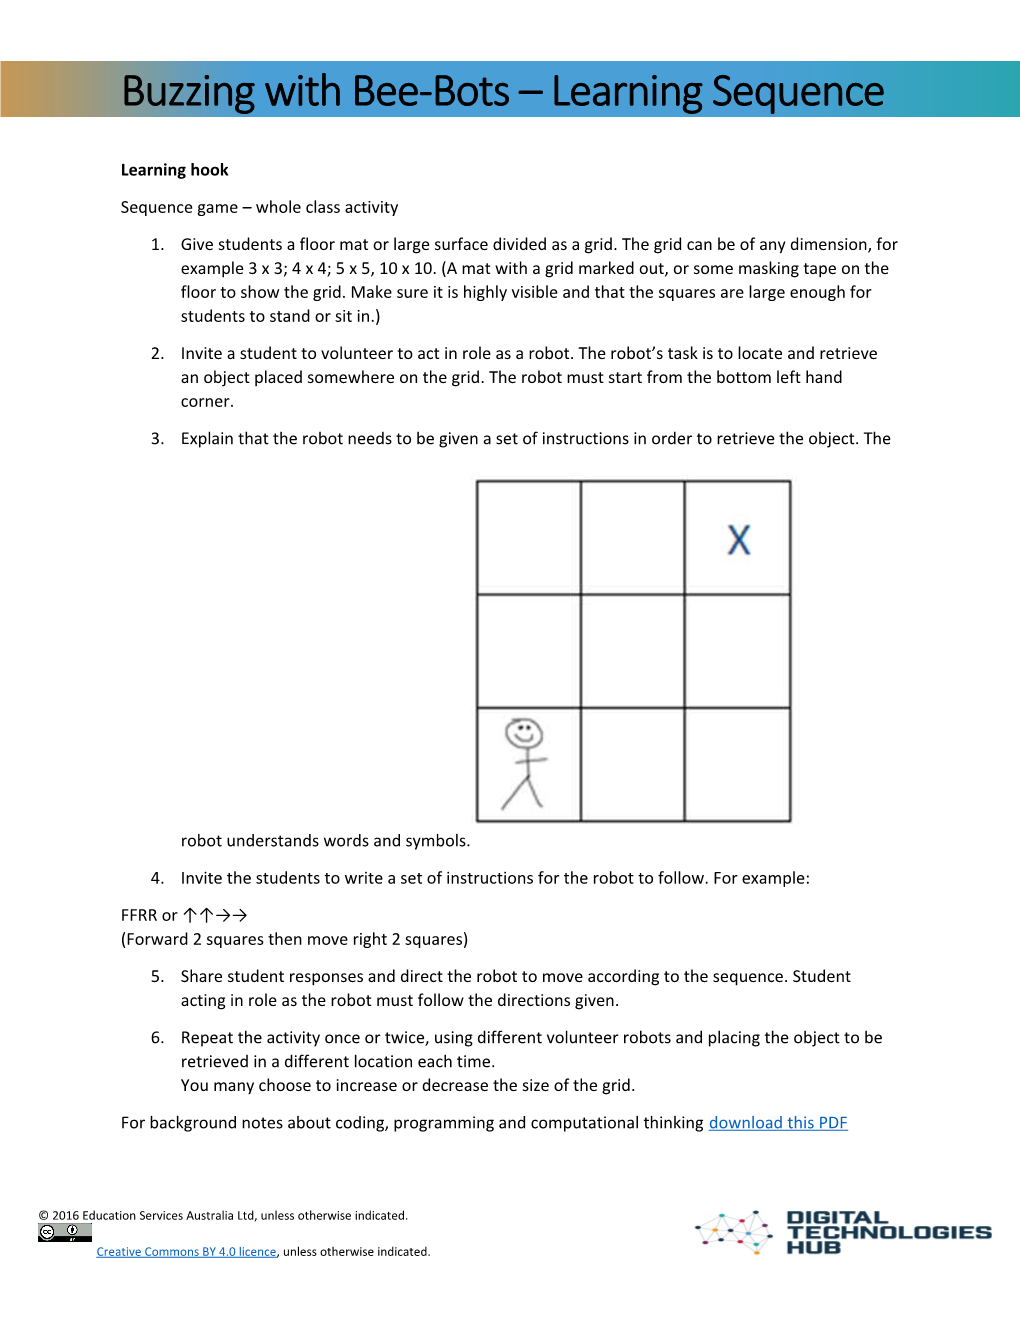 Sequence Game Whole Class Activity